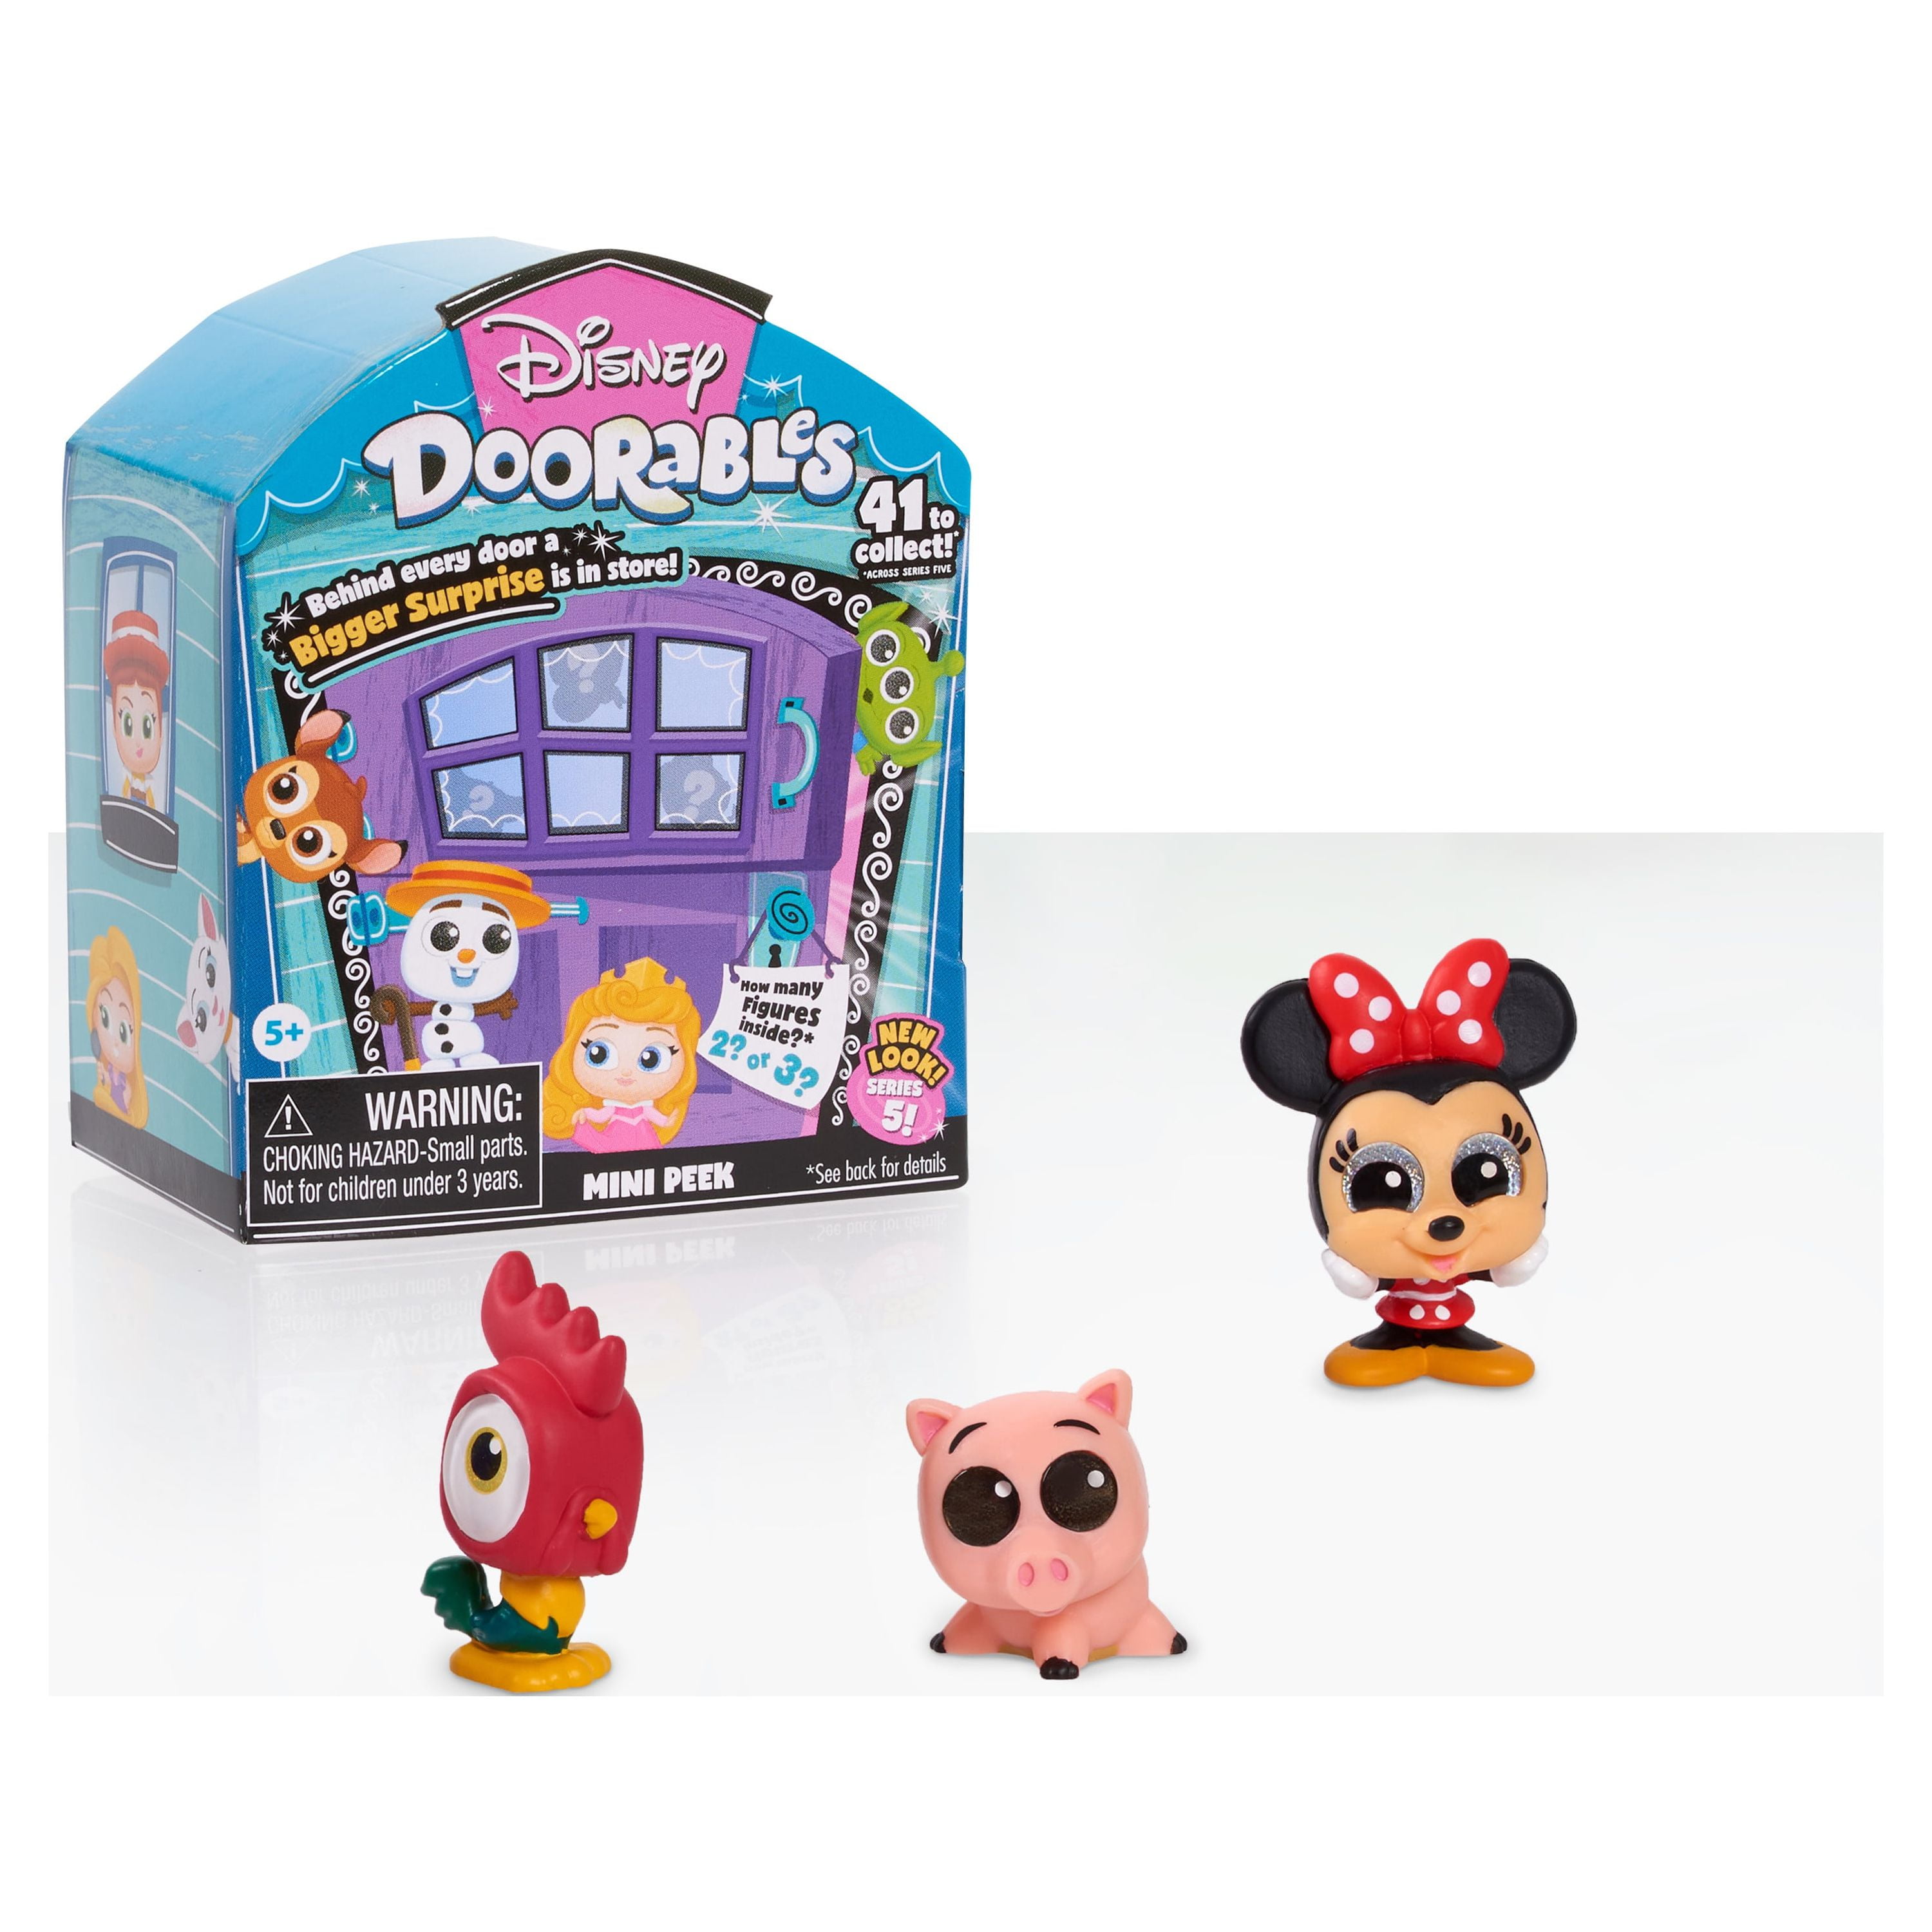 Disney Doorables Movie Moments Series 1, Collectible Mini Figures Styles  May Vary, Kids Toys for Ages 5 up